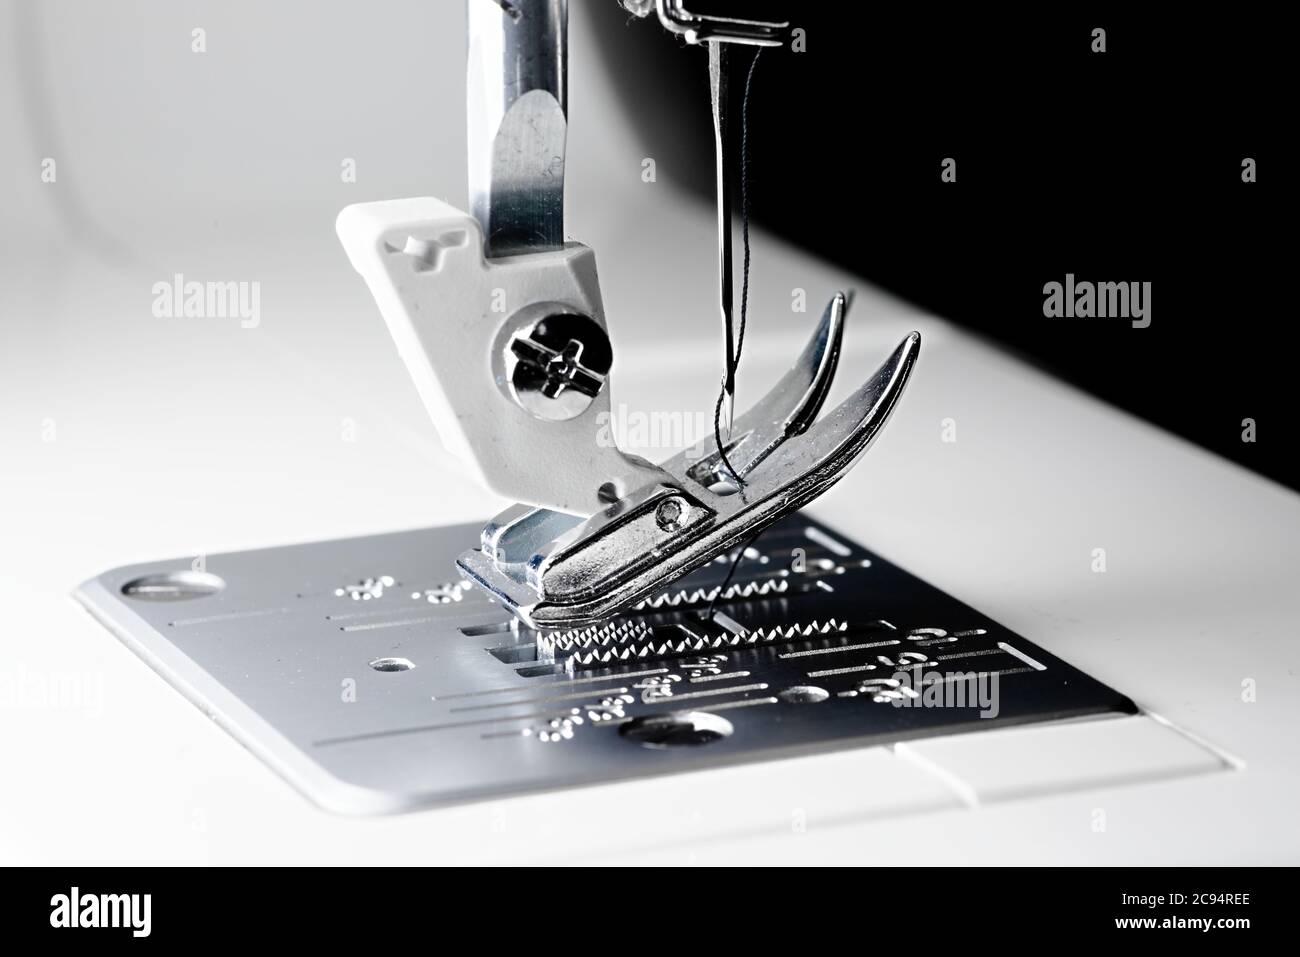 3 - Close macro sewing machine image with selective focus showing needle, thread, presser foot, feed dogs and throat plate. Stock Photo